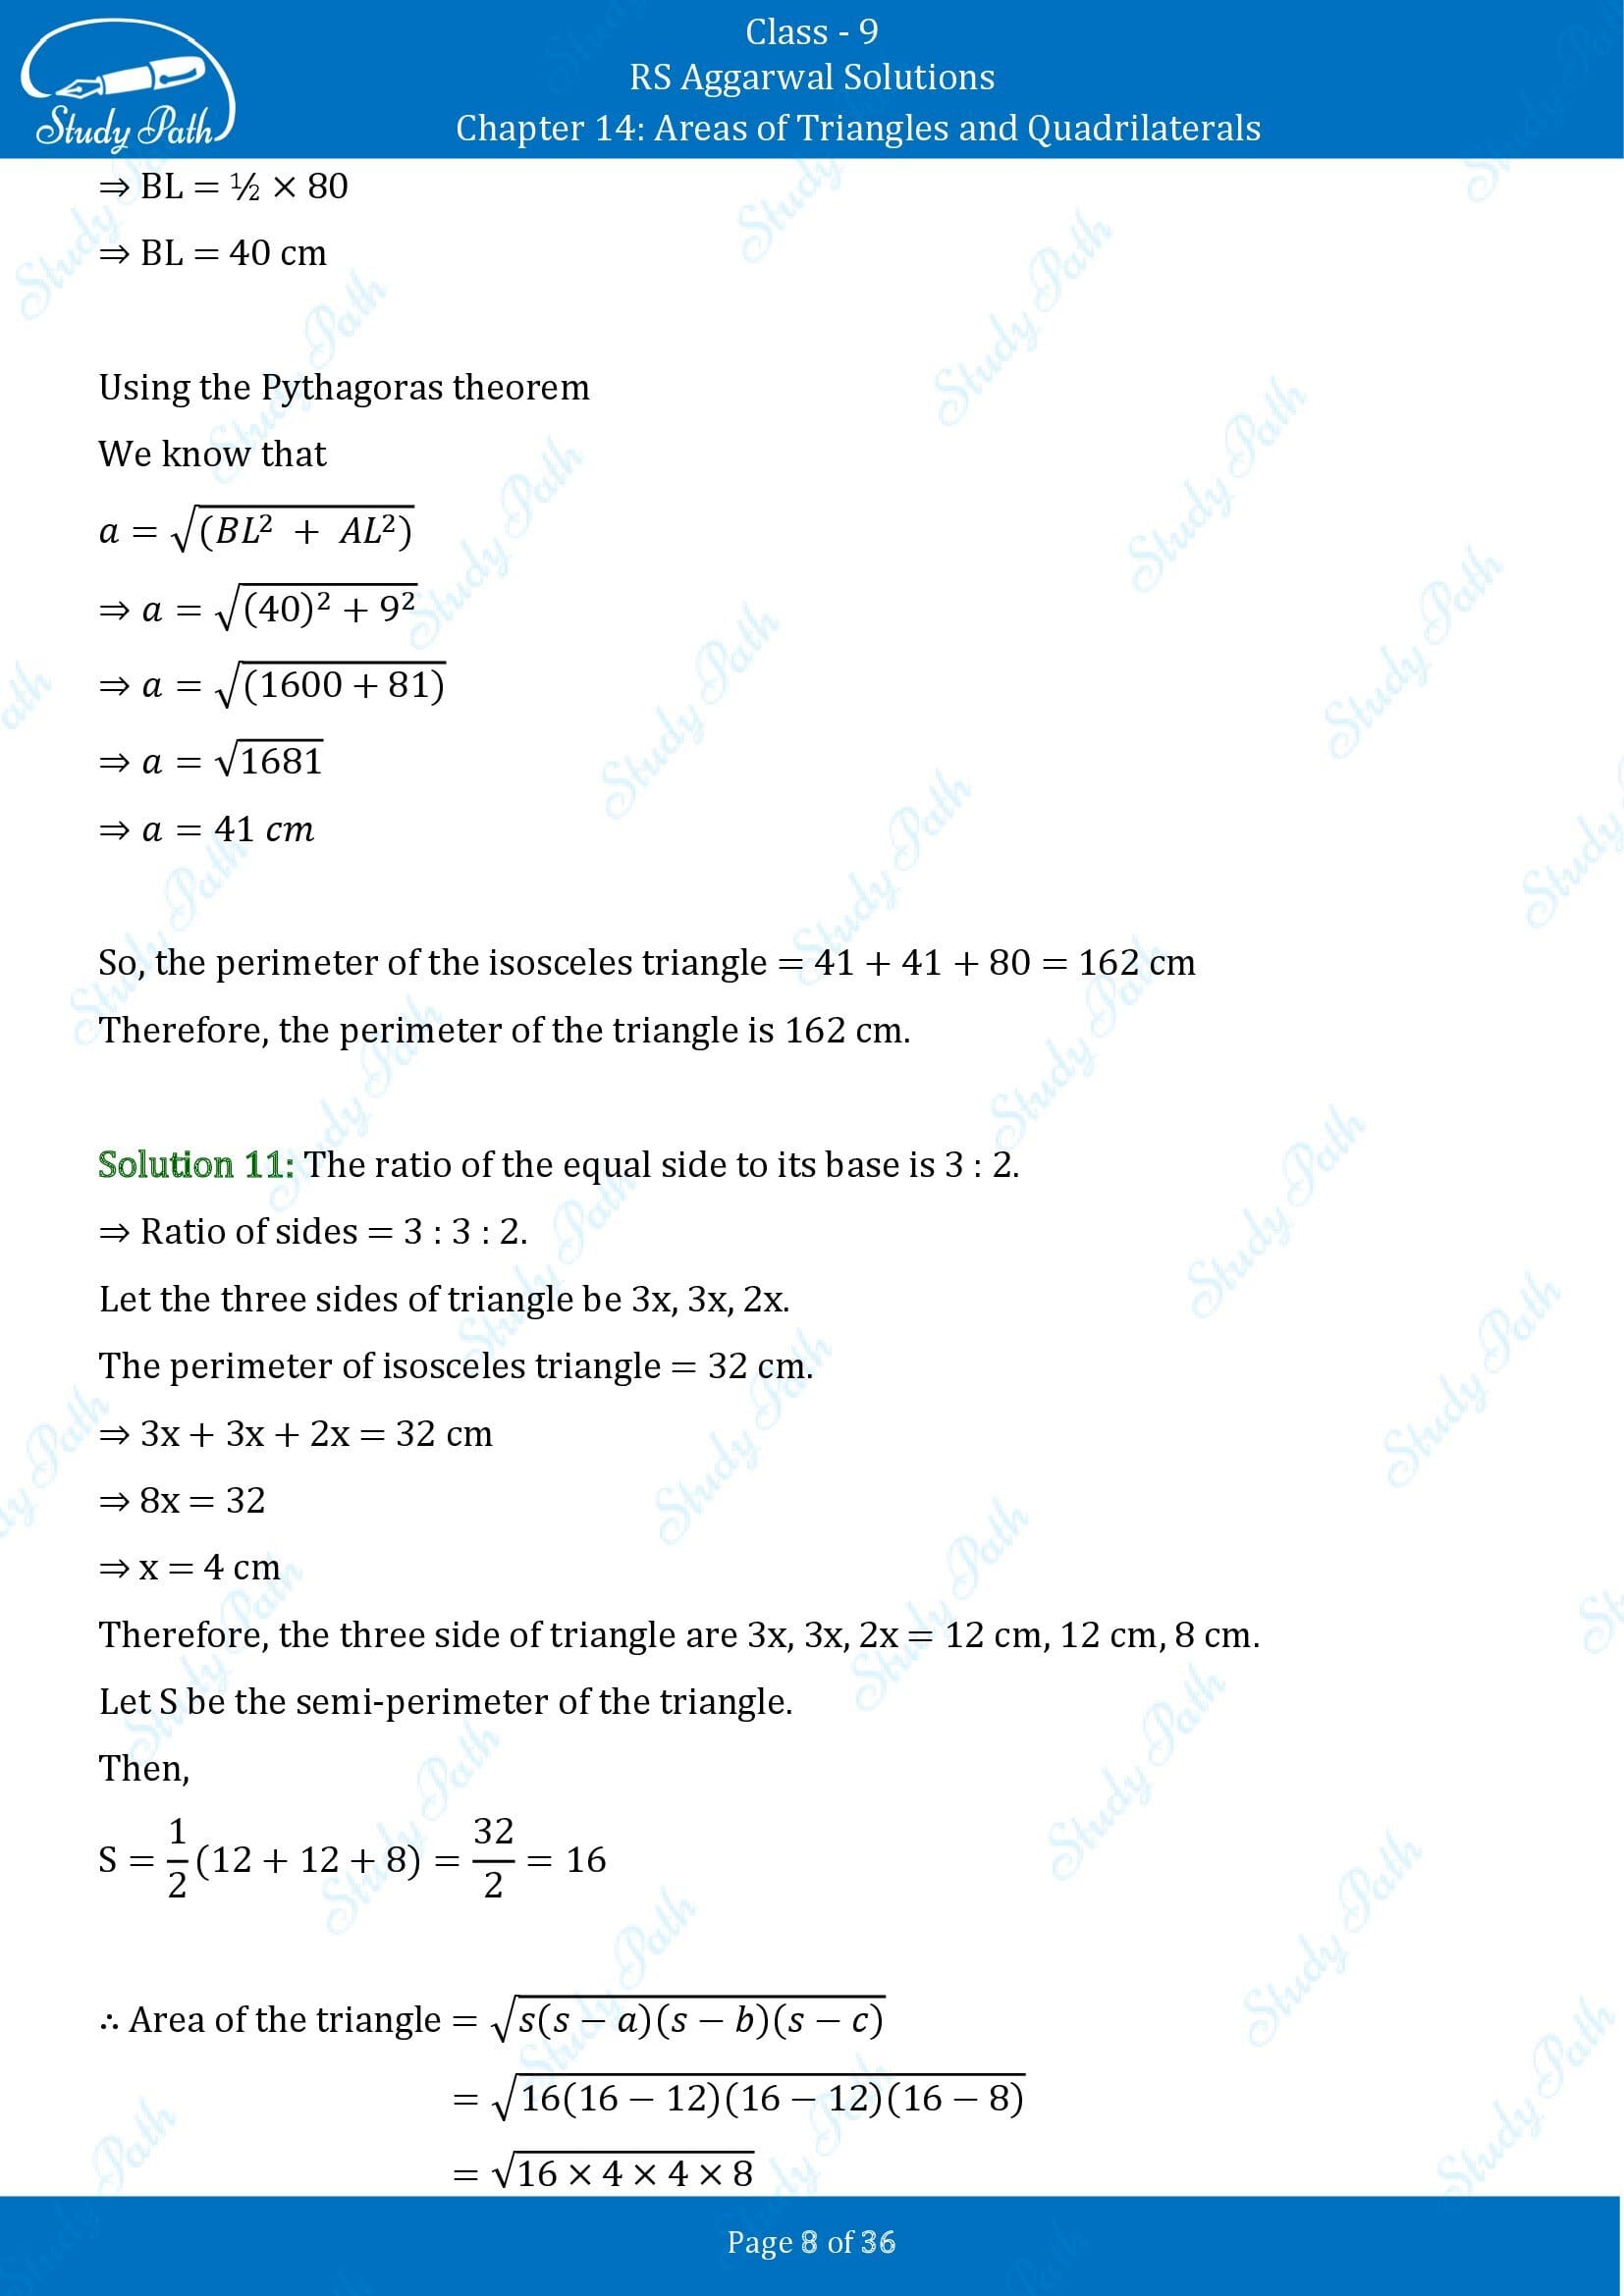 RS Aggarwal Solutions Class 9 Chapter 14 Areas of Triangles and Quadrilaterals Exercise 14 00008